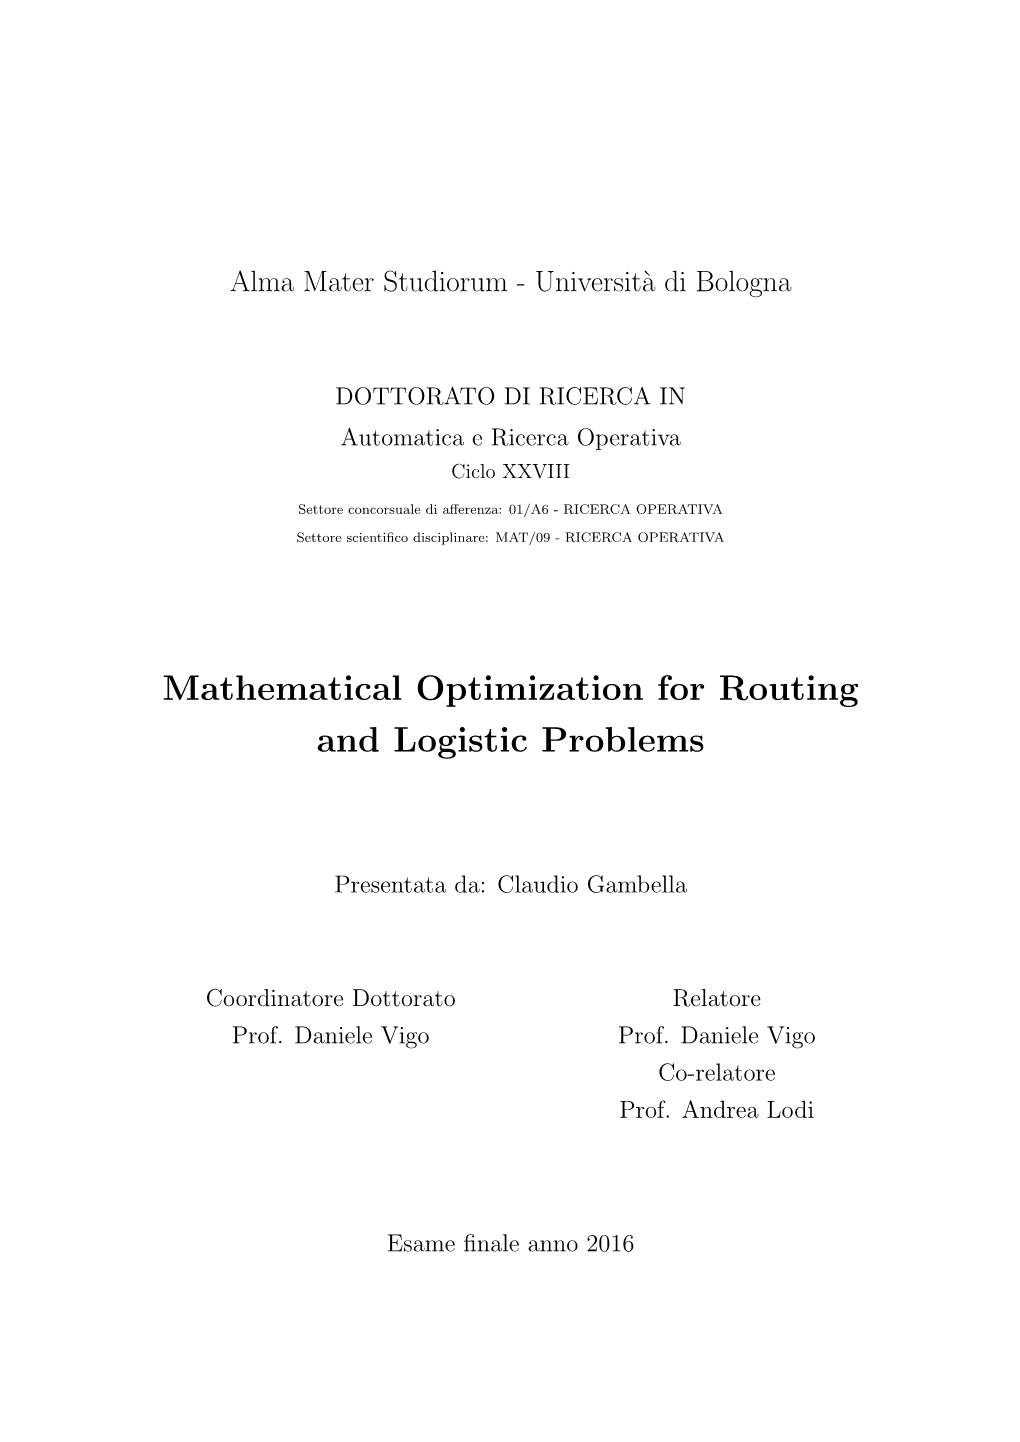 Mathematical Optimization for Routing and Logistic Problems